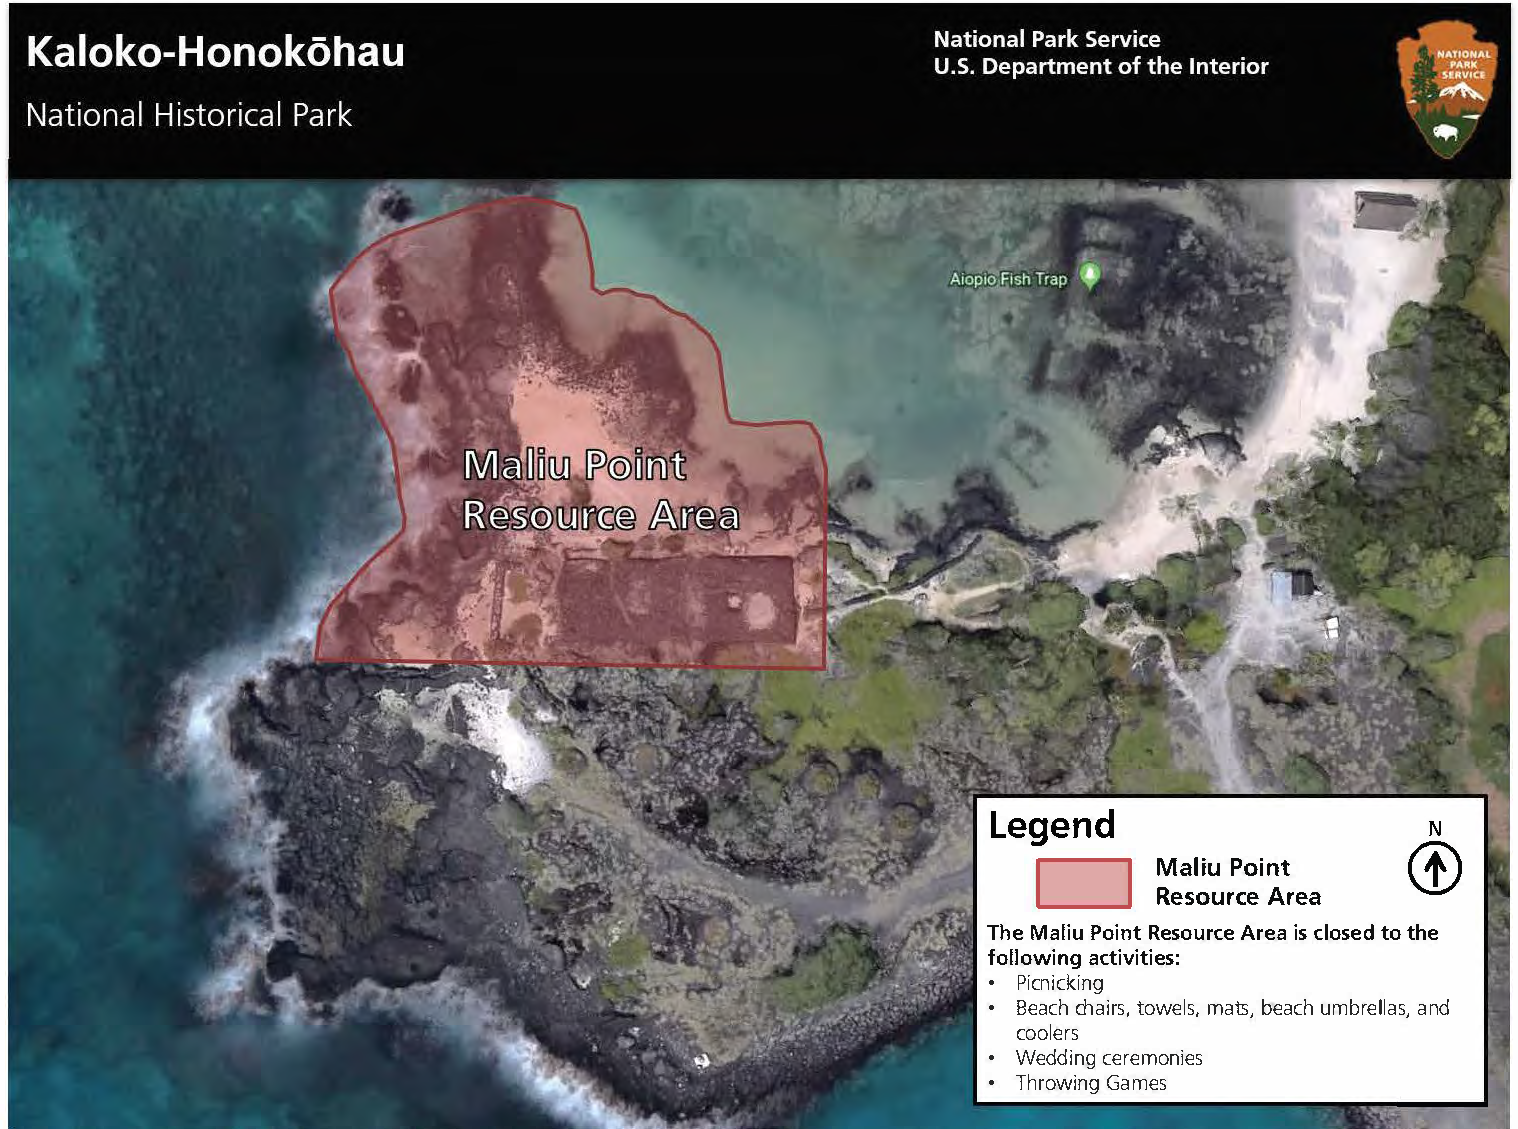 A map of the Maliu Point Resource Area with restrictions